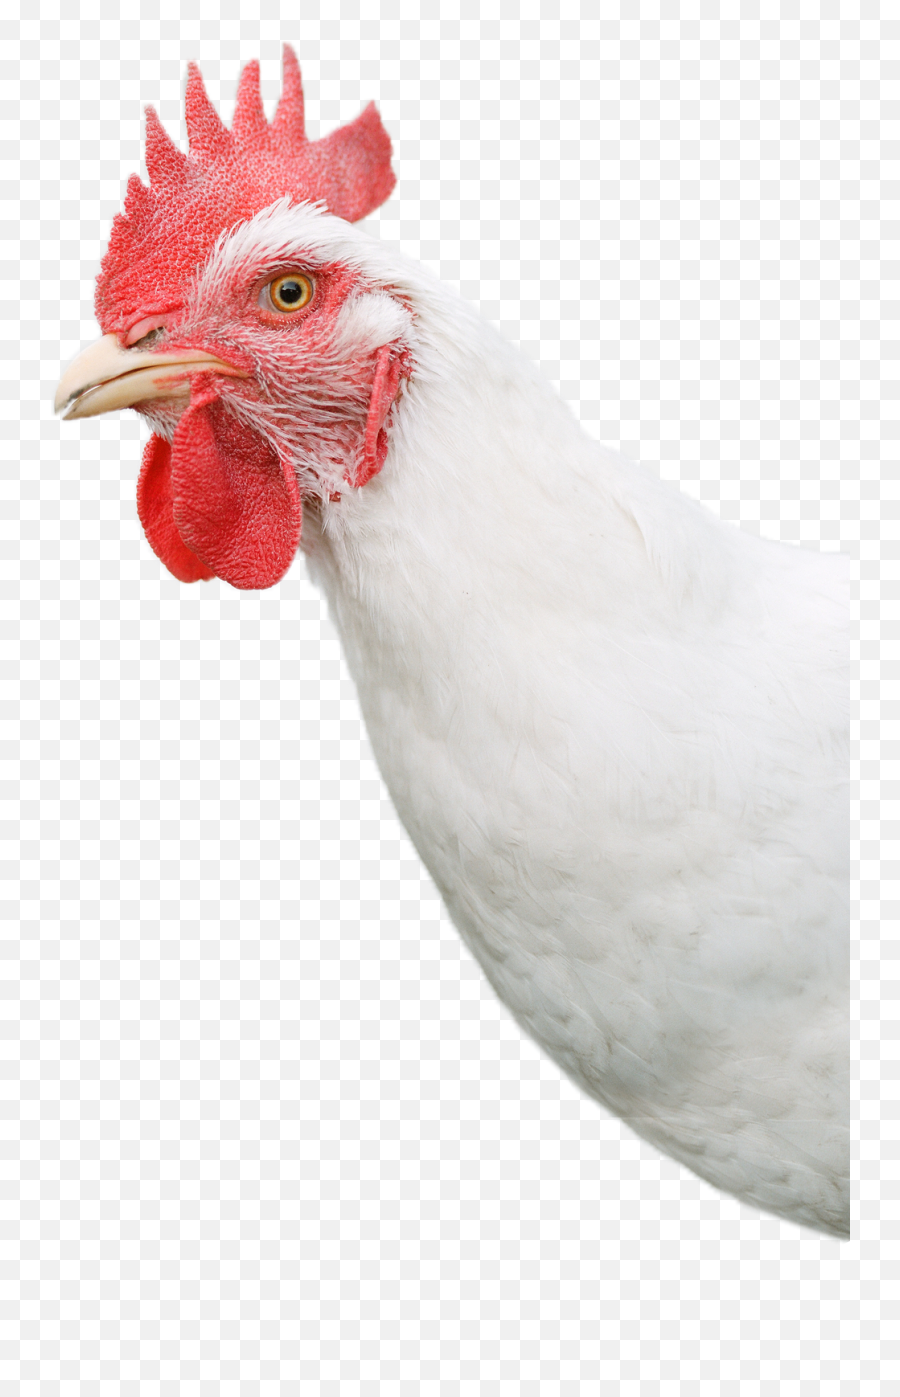 Hen Png Image File Rooster - Clip Art Library Chicken Images Hd White Emoji,Rooster Emoji